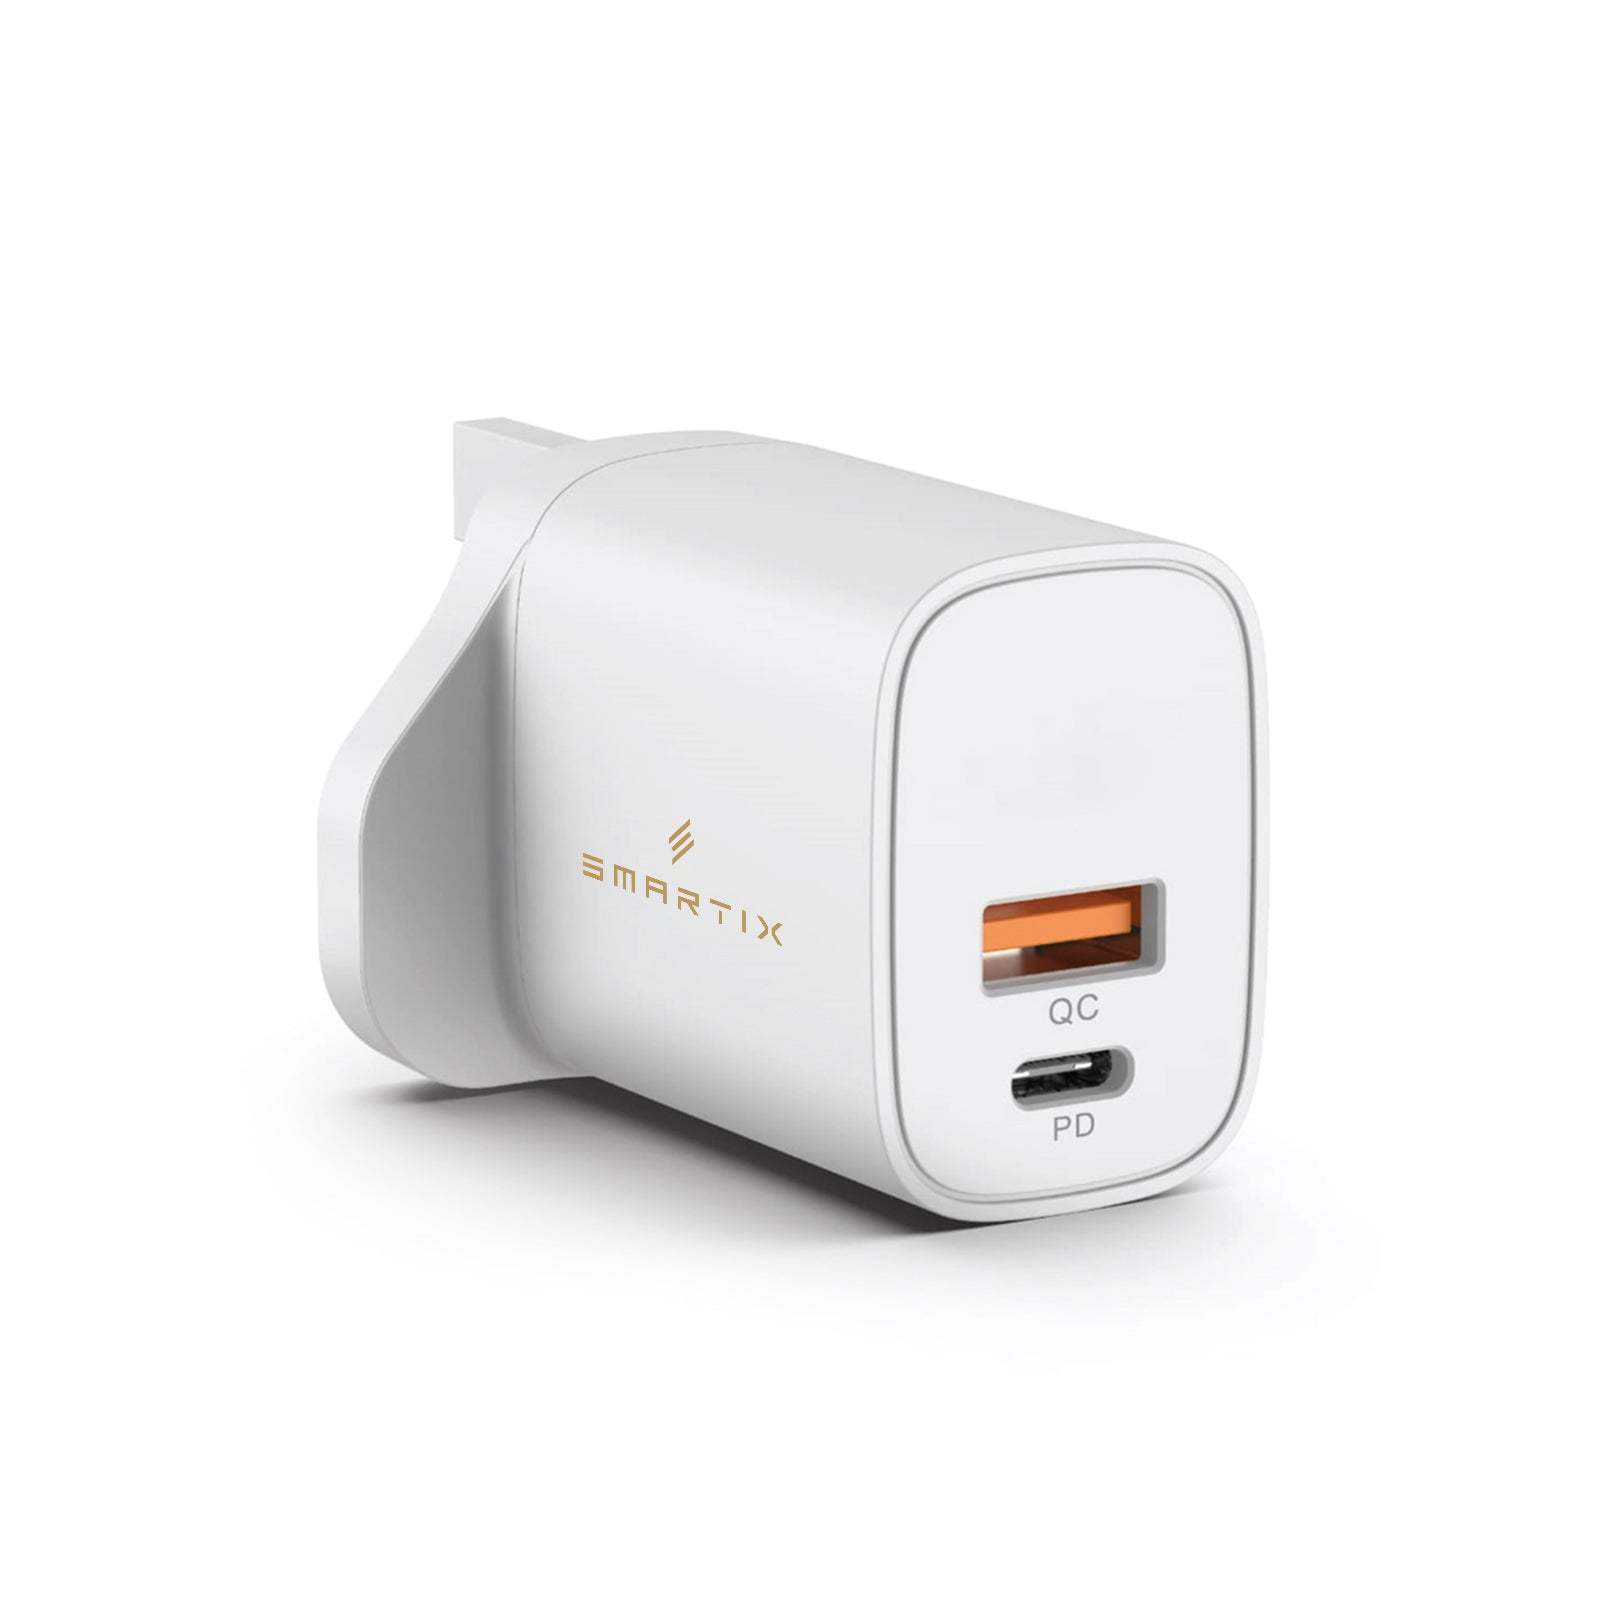 Celltronix Just Charge It™ Rapid Charger with Interchangeable Adapters